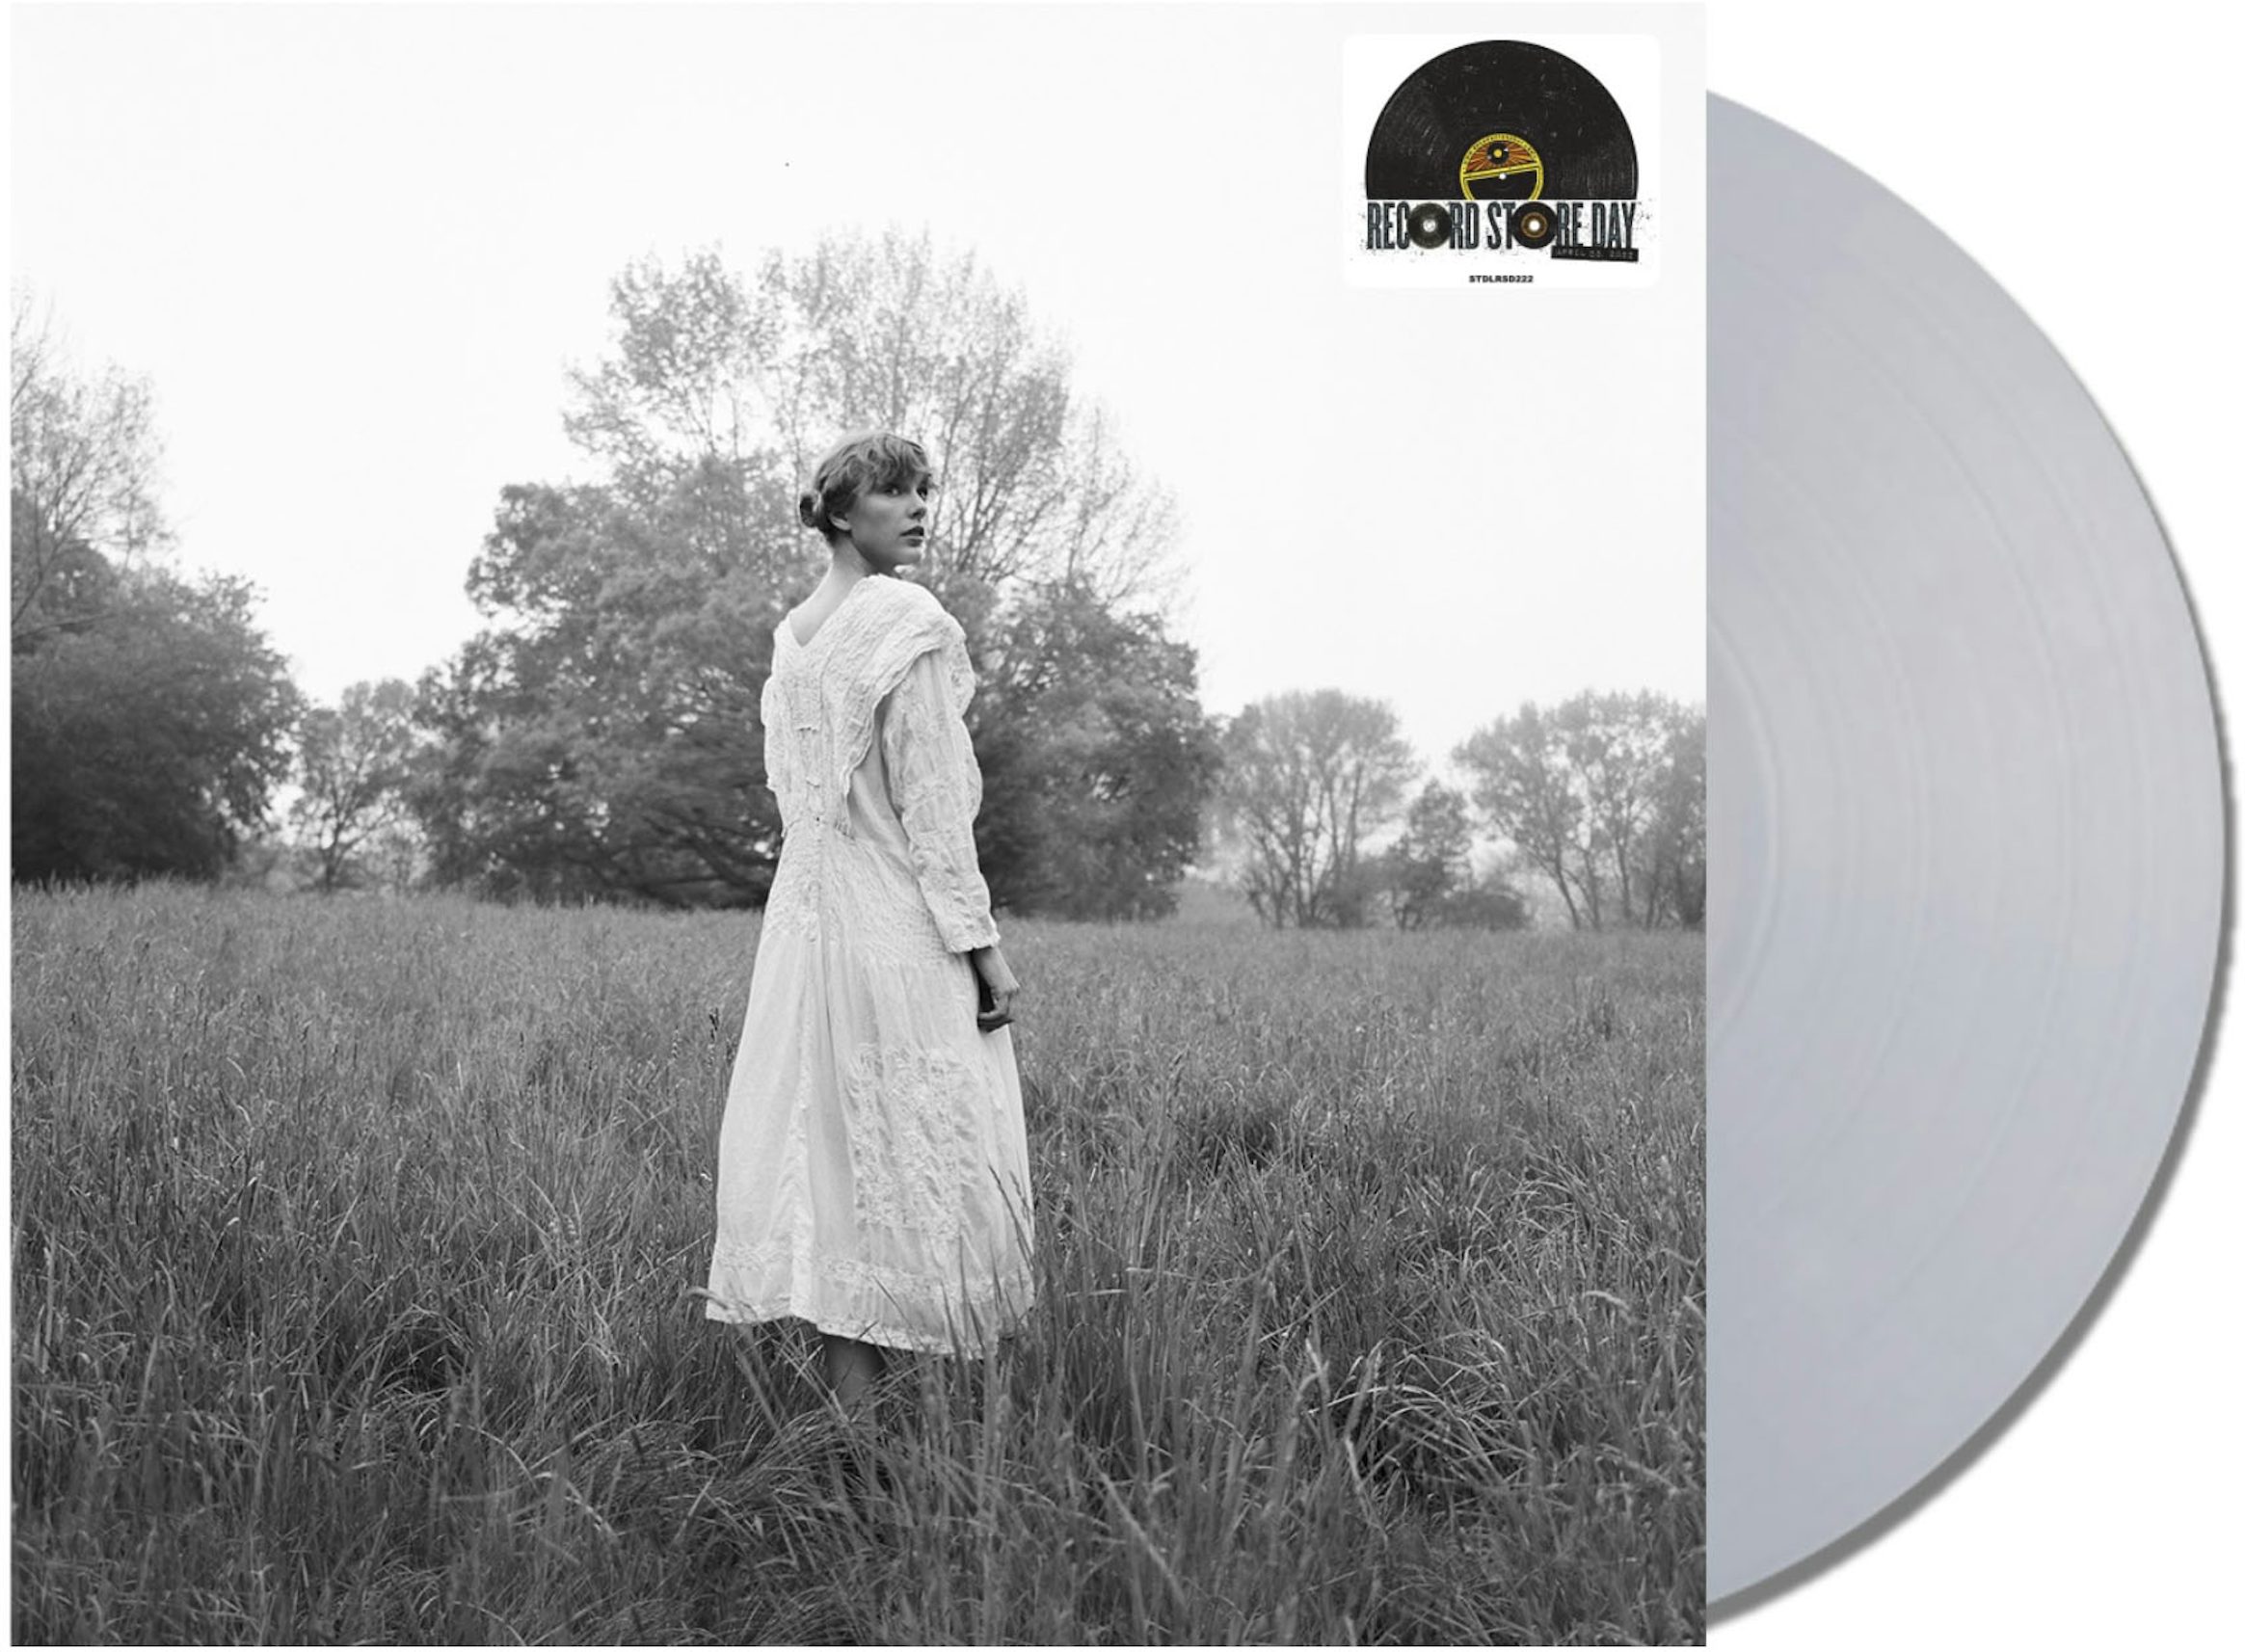 https://images.stockx.com/images/Taylor-Swift-The-Lakes-Record-2022-Store-Day-Exclusive-Vinyl-Silver.jpg?fit=fill&bg=FFFFFF&w=1200&h=857&fm=jpg&auto=compress&dpr=2&trim=color&updated_at=1651022382&q=60